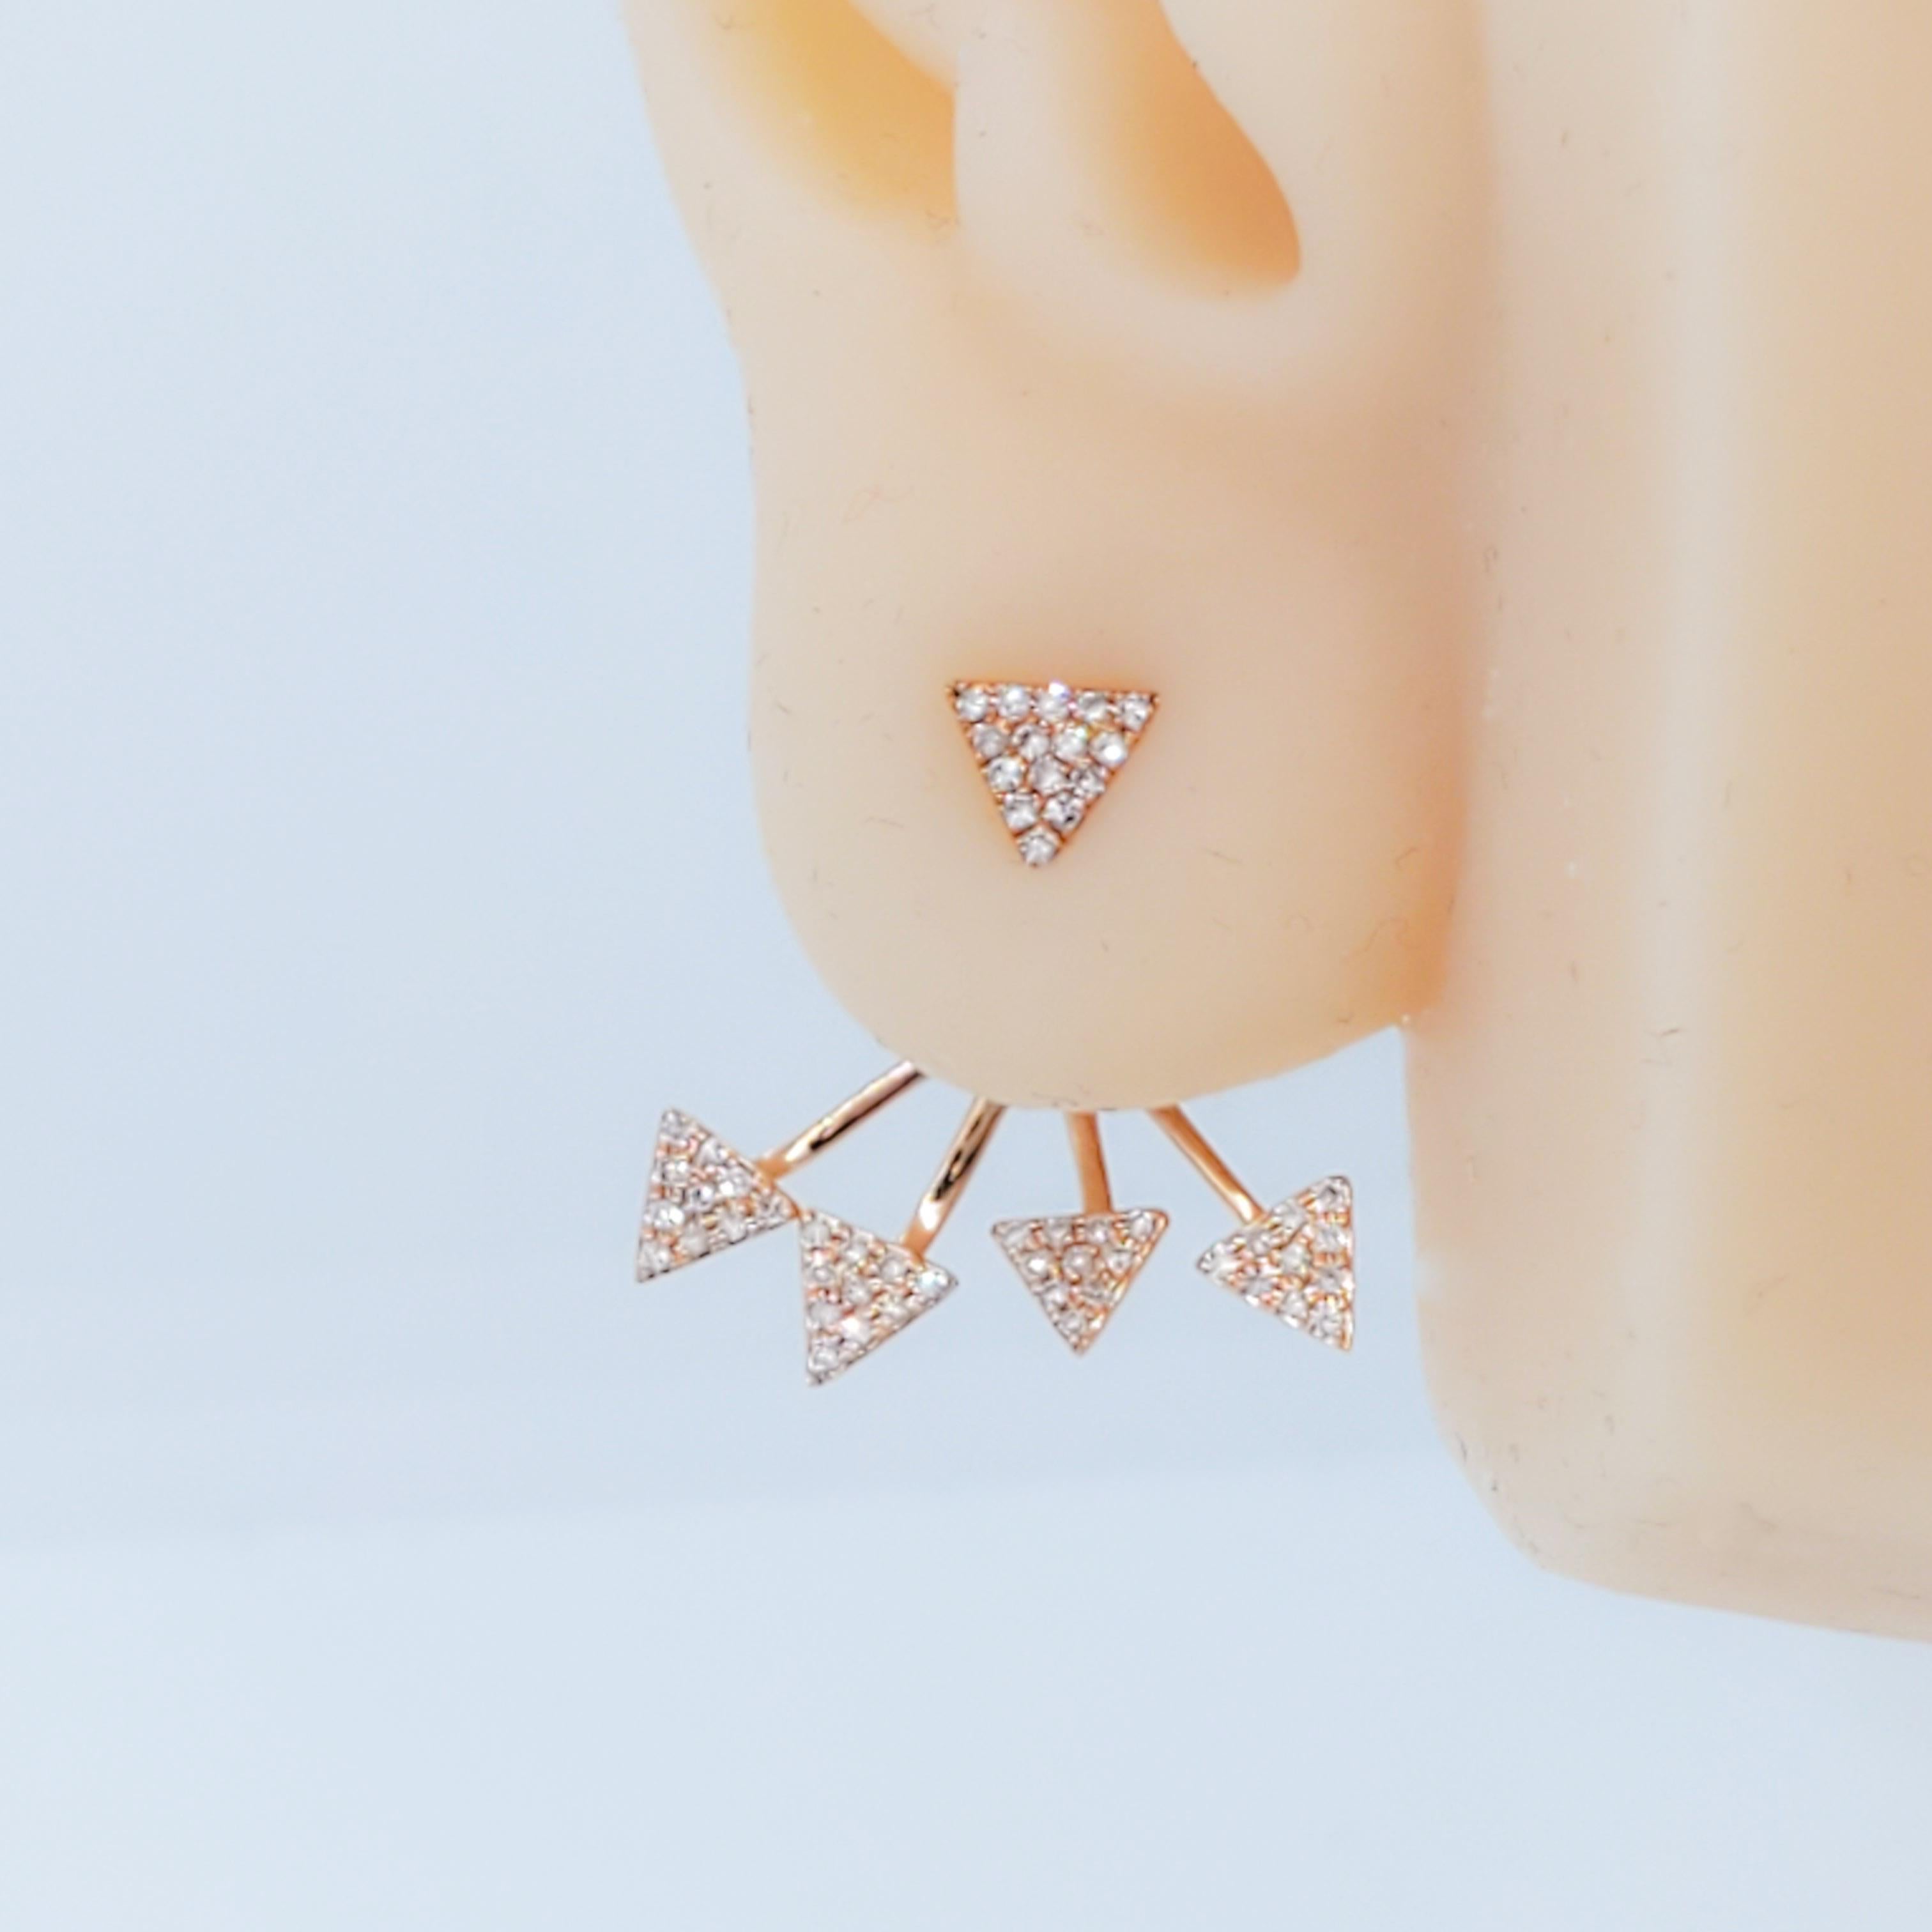 Beautiful contemporary earrings that can be worn as a stud or with the spray diamonds under the lobe.  Total of 0.20 ct. of good quality white diamond rounds.  Handmade 14k rose gold mountings.  Push back.  